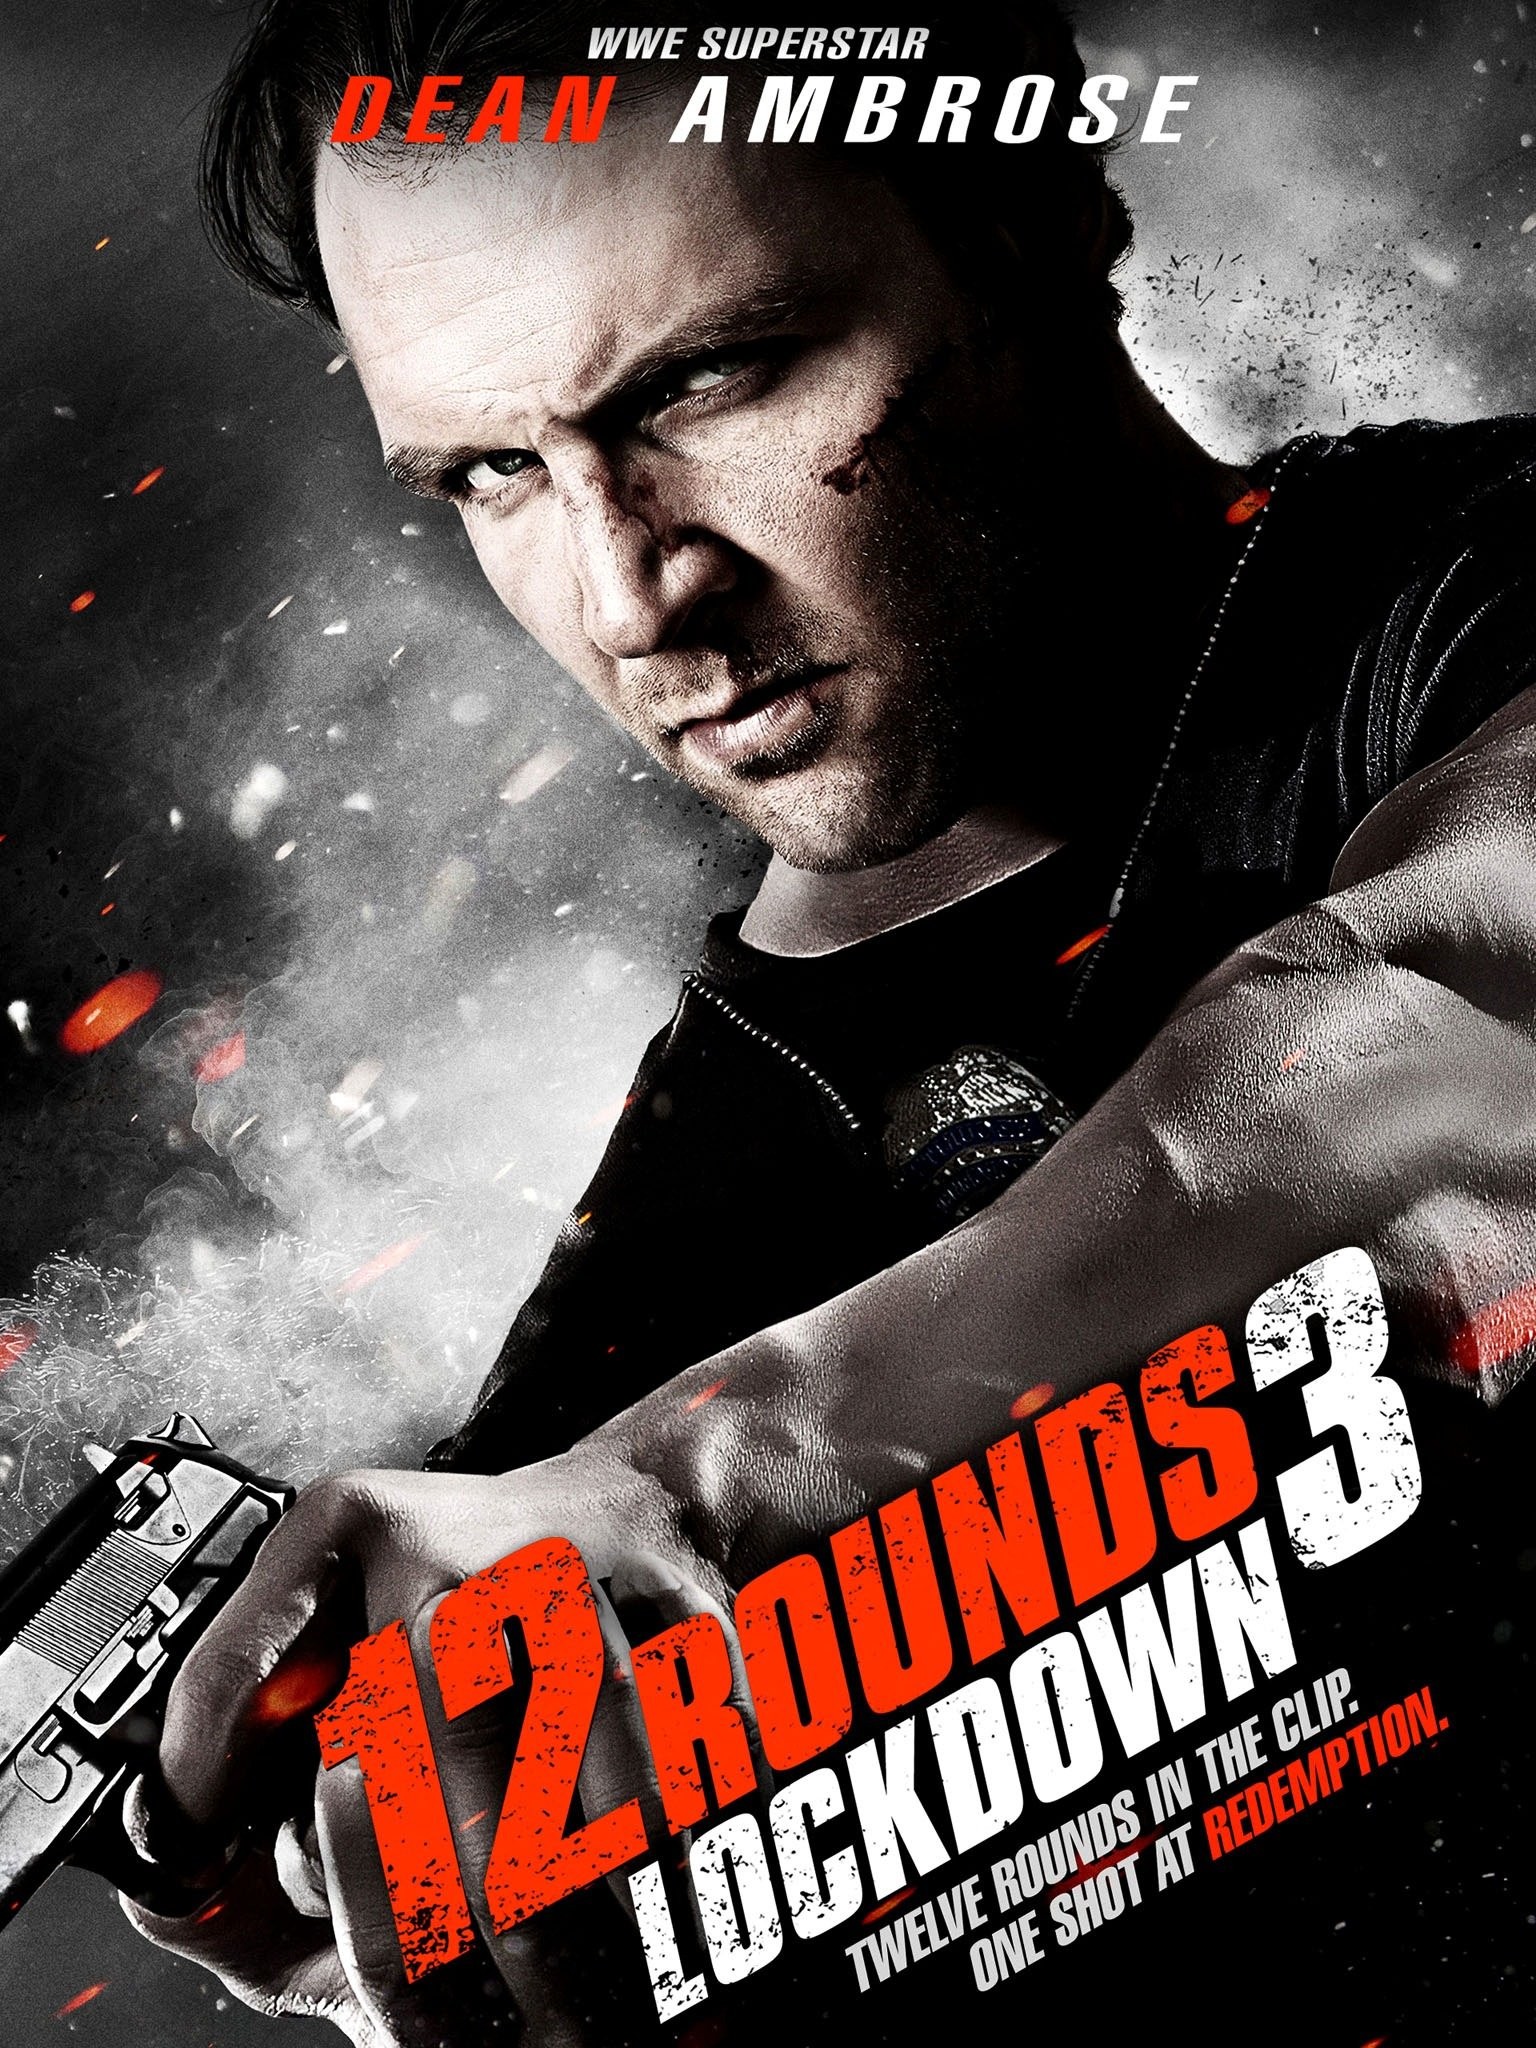 DVD - 12 rounds 2